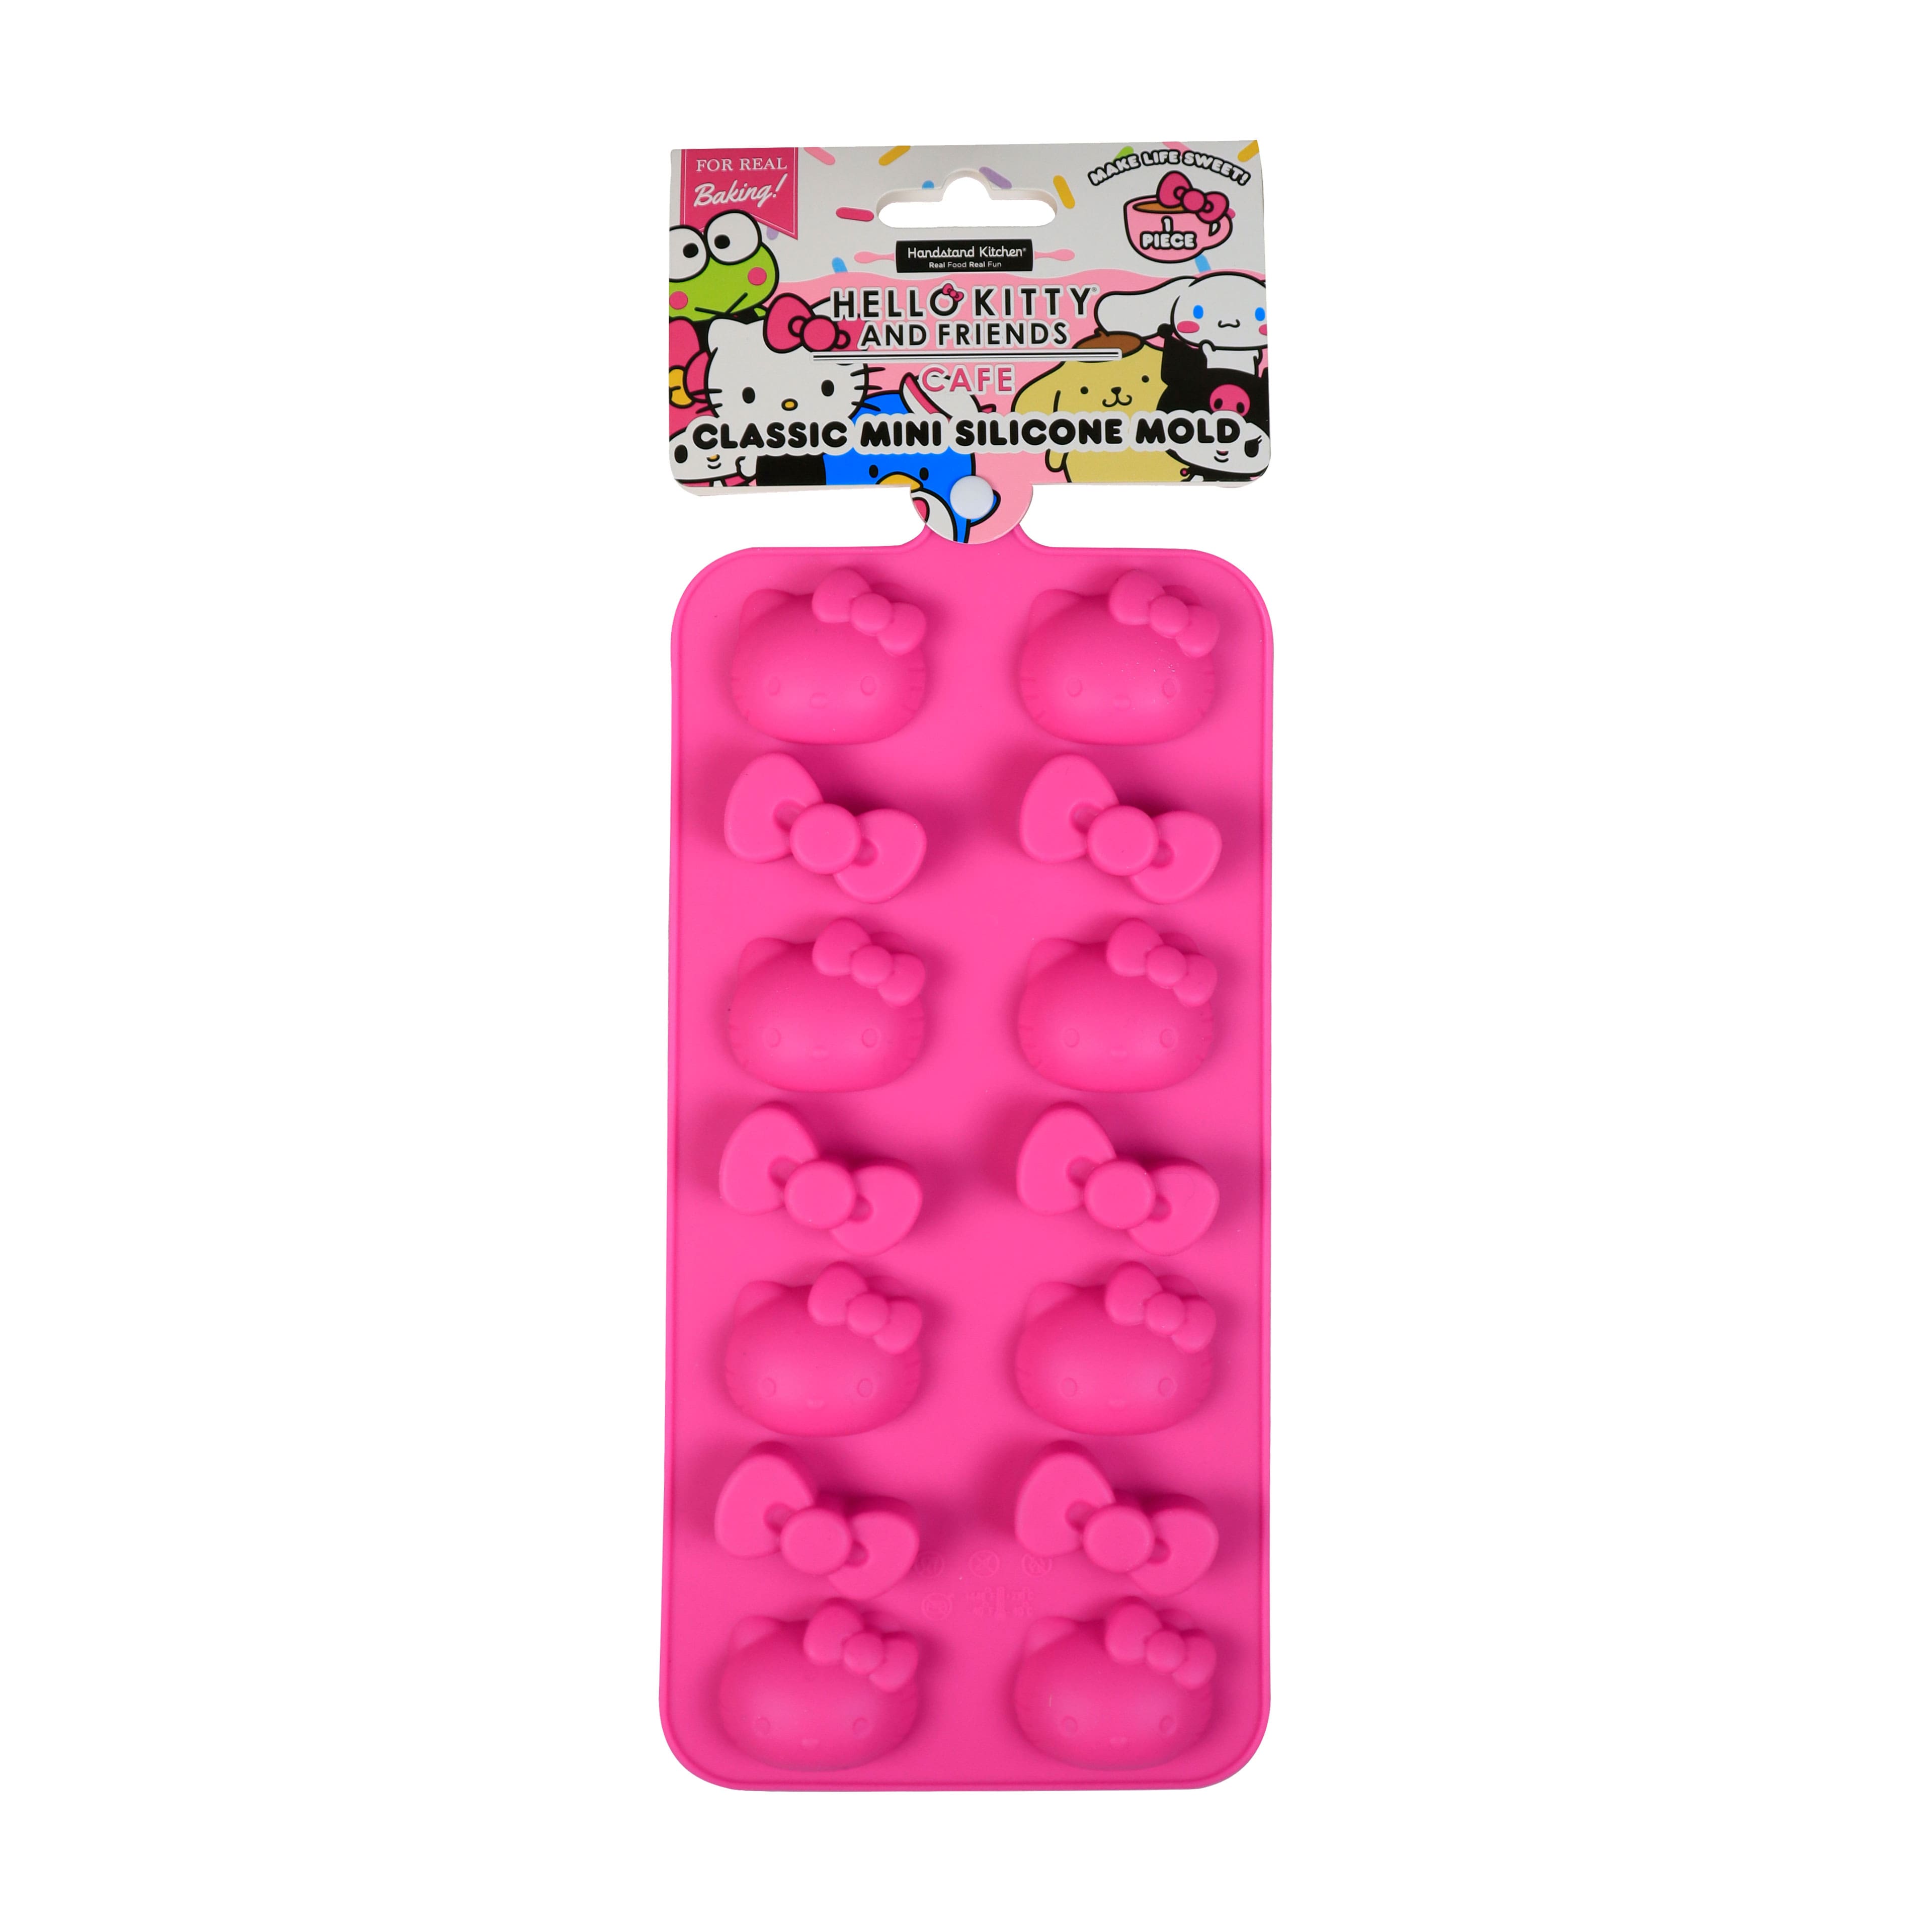 Handstand Kitchen Hello Kitty and Friends Classic Mini Silicone Mold in Pink | 4.6 x 9.5 x 2.4 | Michaels